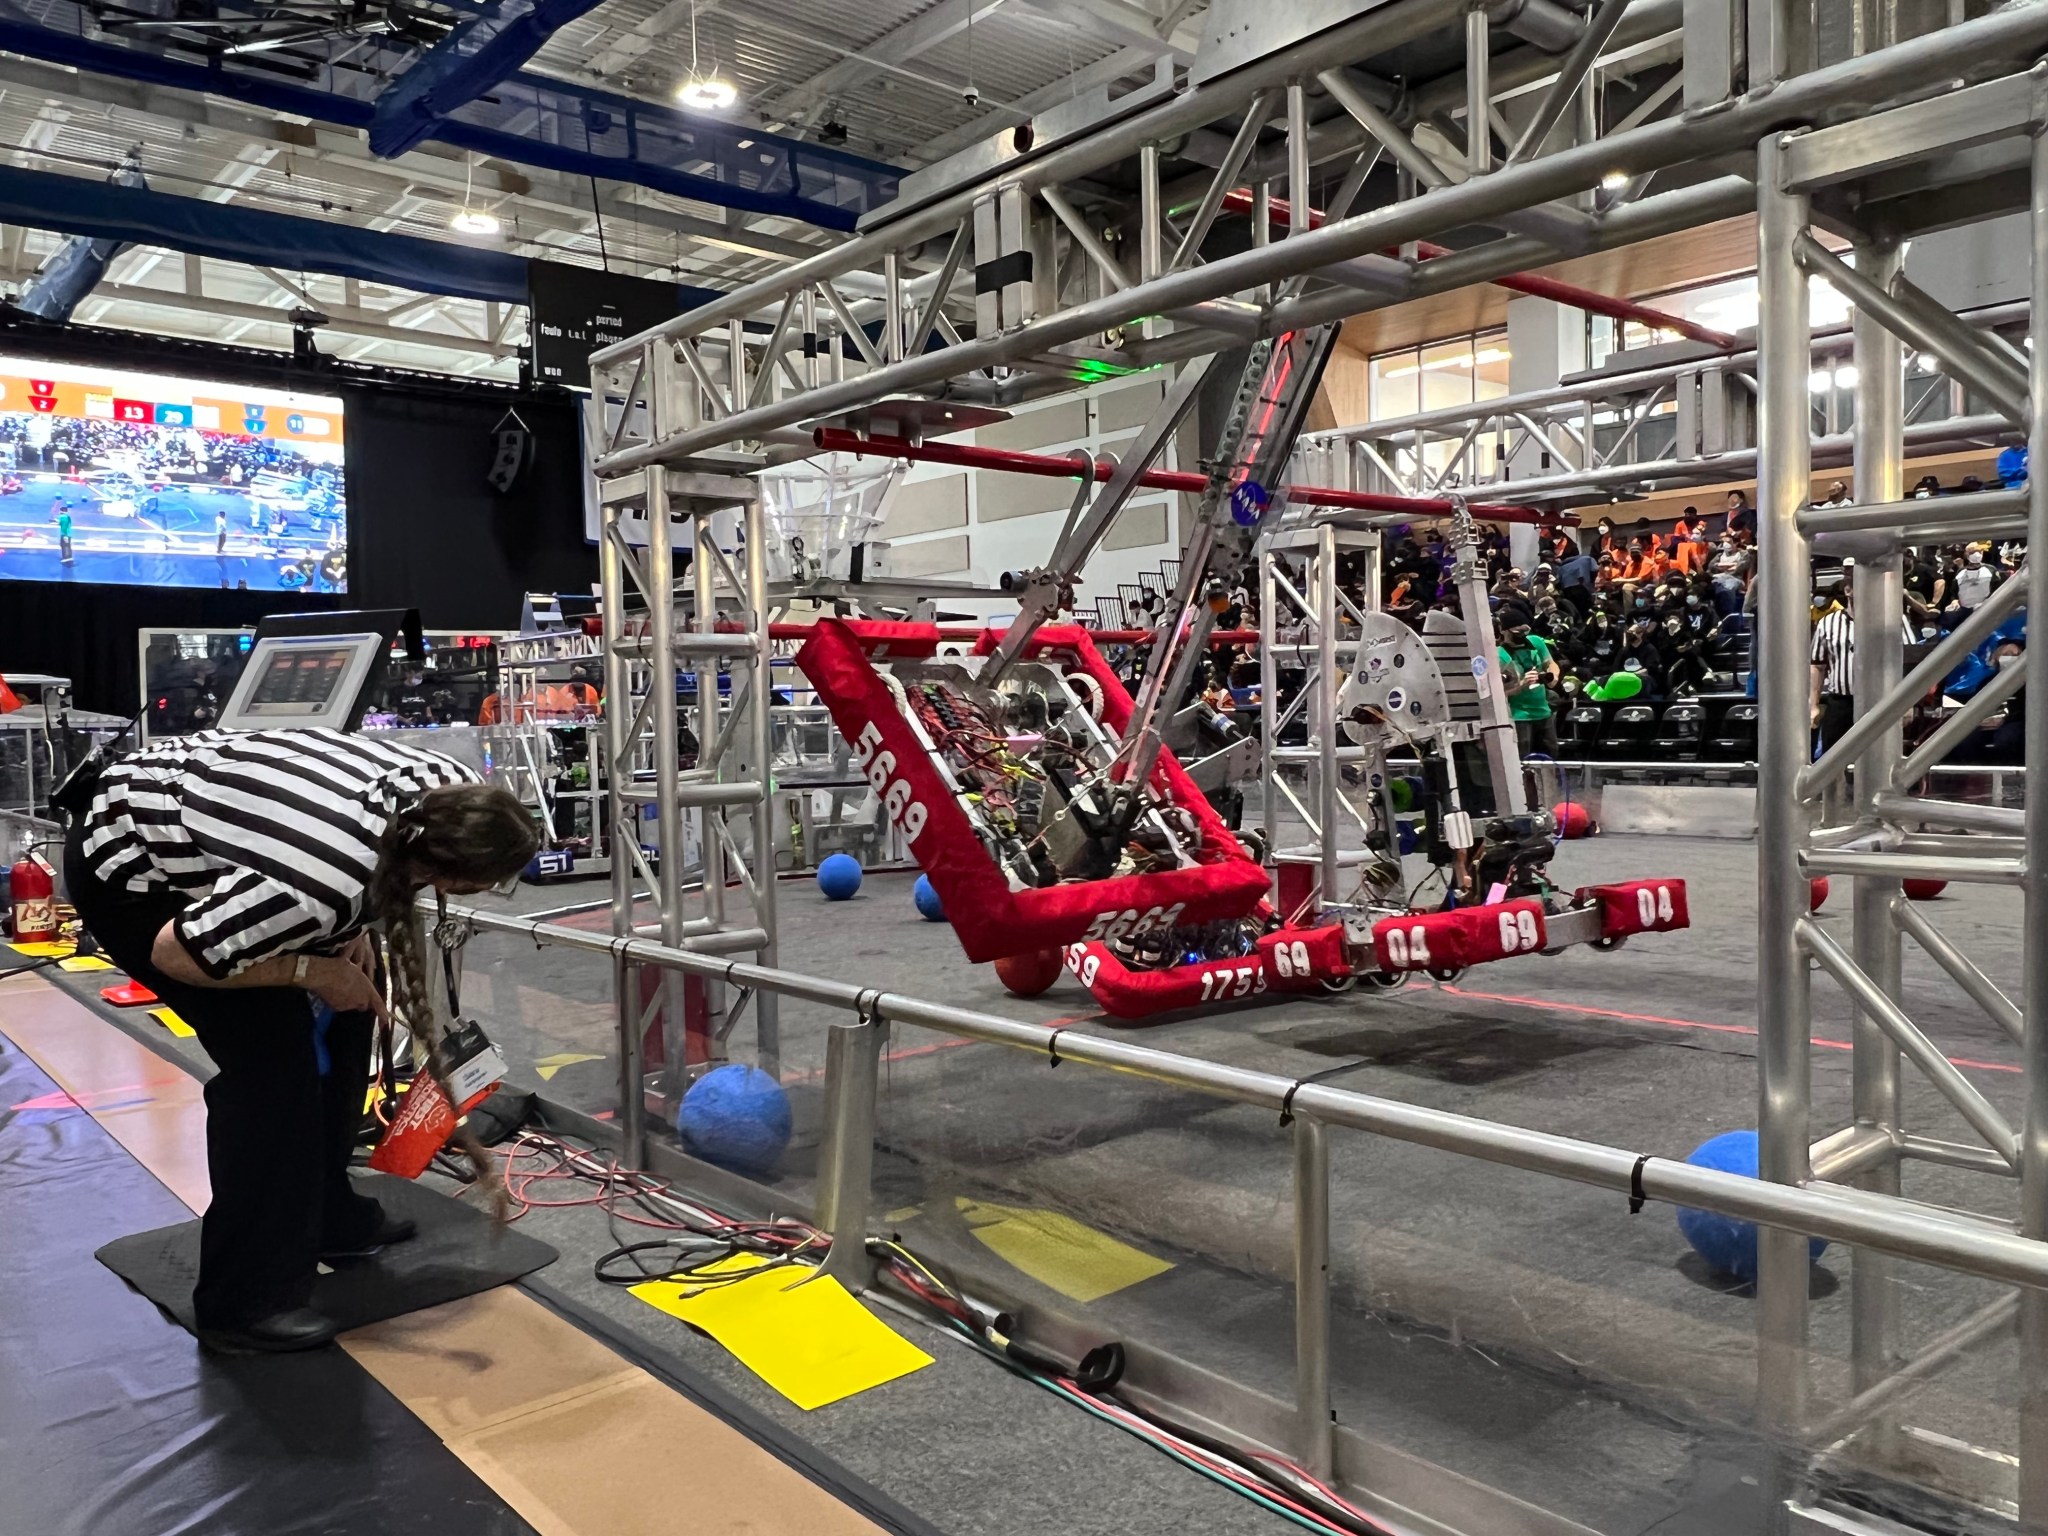 A referee at the 2022 Los Angeles Regional FIRST Robotics Competition examines robots that have managed to climb the rungs of the overhead bars in a corner of the playing field, earning them extra points.